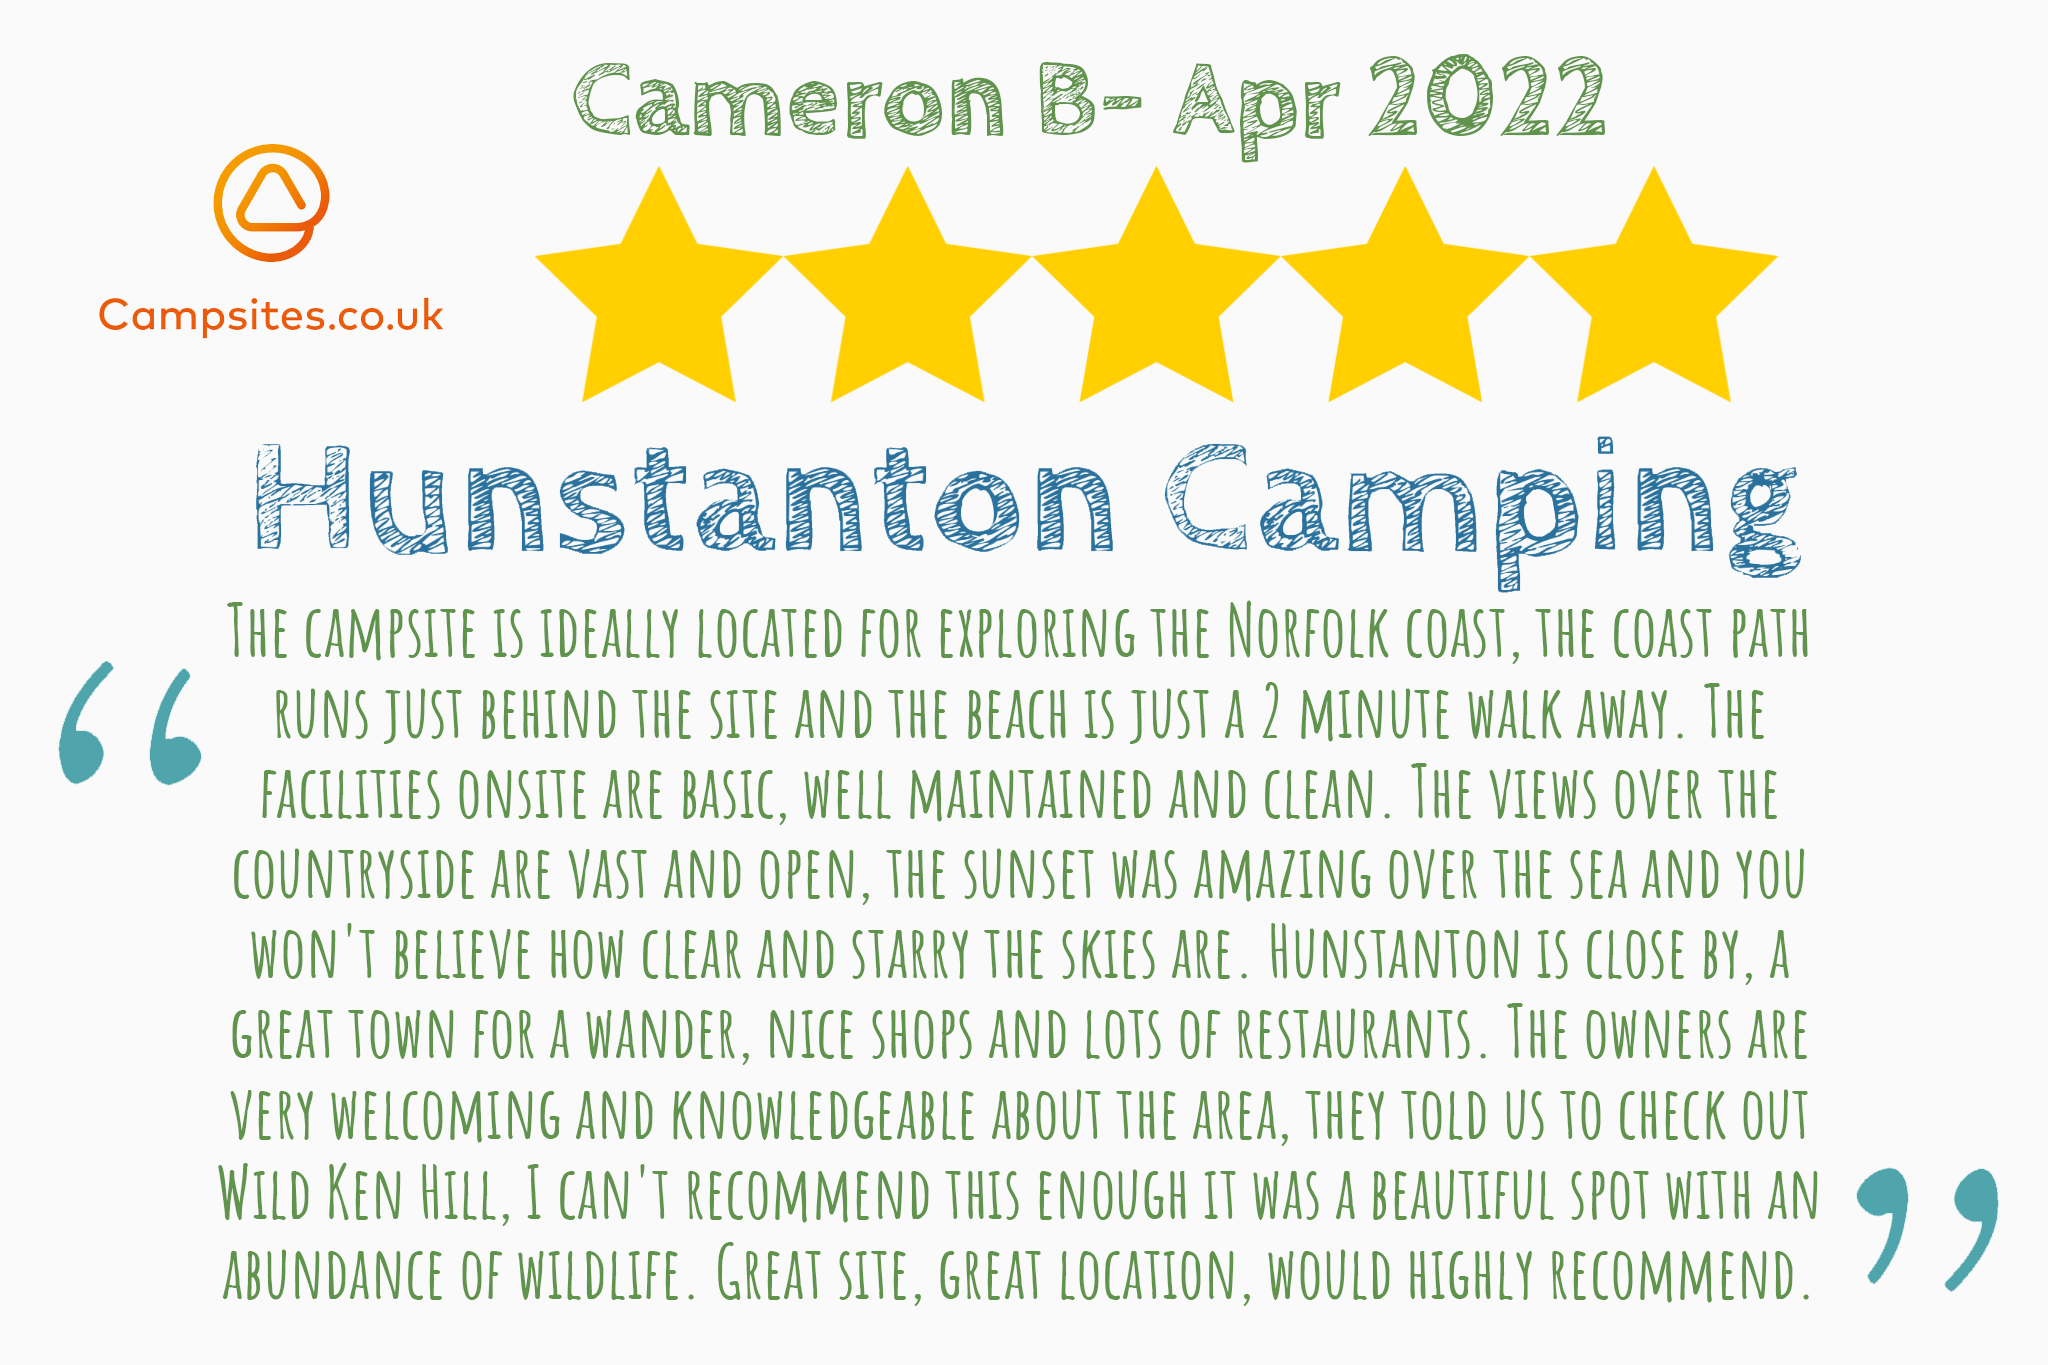 5-star review from Cameron B on Campsites.co.uk that says "The campsite is ideally located for exploring the Norfolk coast, the coast path runs just behind the site and the beach is just a 2 minute walk away. The facilities onsite are basic, well maintained and clean. The views over the countryside are vast and open, the sunset was amazing over the sea and you won't believe how clear and starry the skies are. Hunstanton is close by, a great town for a wander, nice shops and lots of restaurants. The owners are very welcoming and knowledgeable about the area, they told us to check out Wild Ken Hill, I can't recommend this enough it was a beautiful spot with an abundance of wildlife. Great site, great location, would highly recommend."